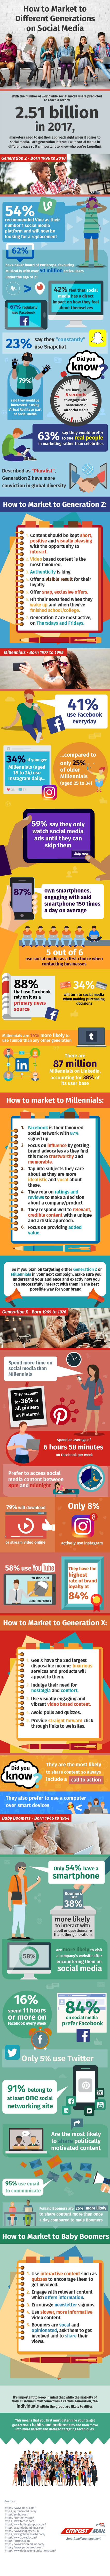 How to market to generations infographic